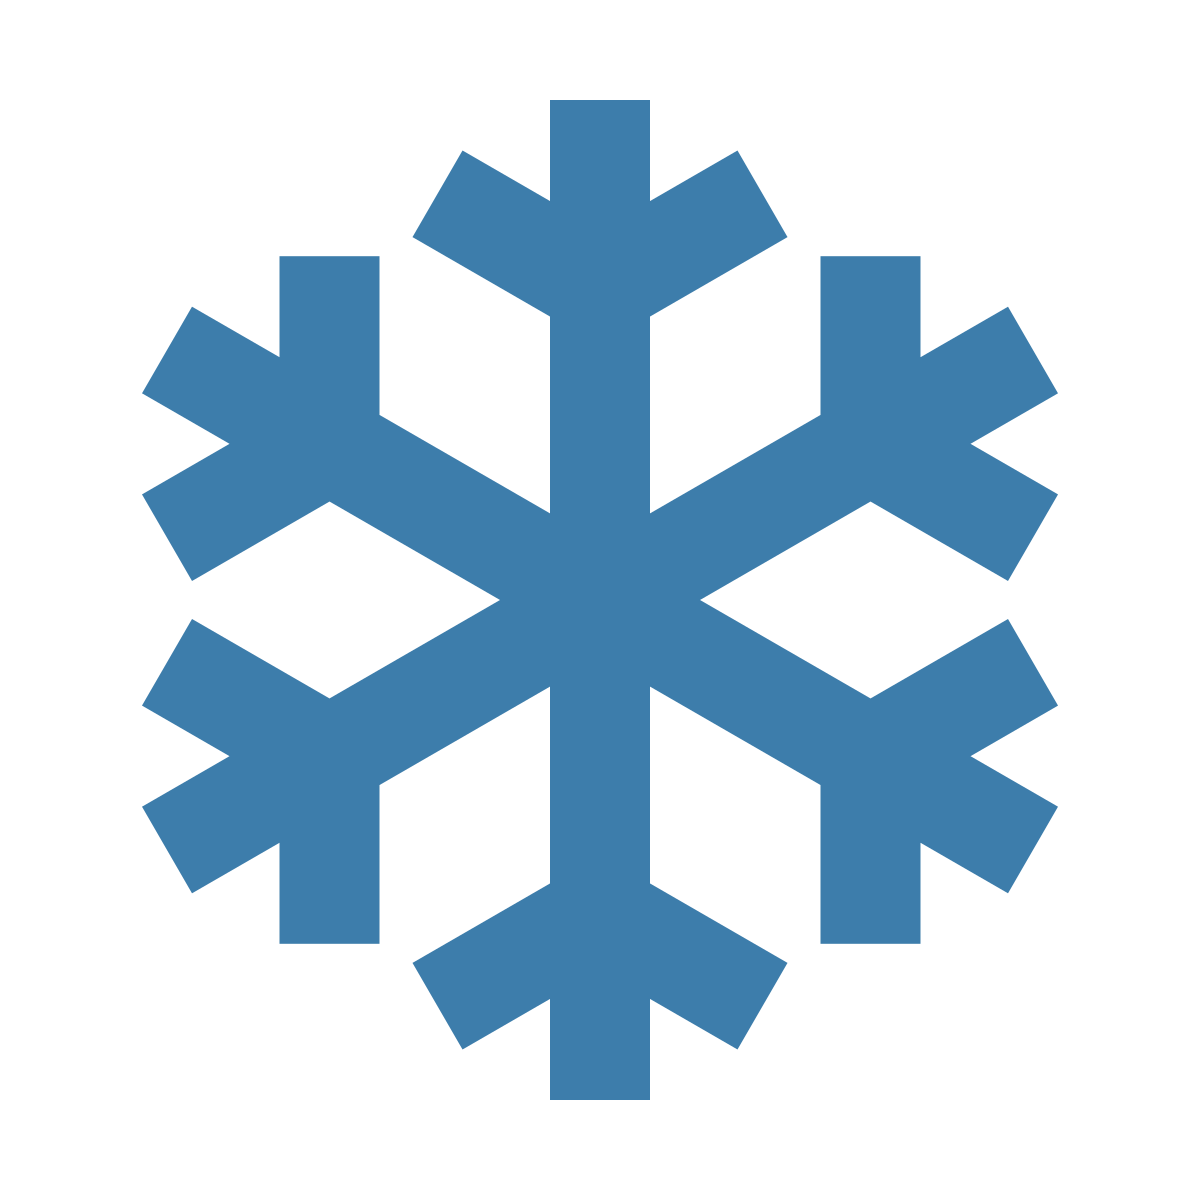 Download File Snow Flake Svg Wikimedia Commons